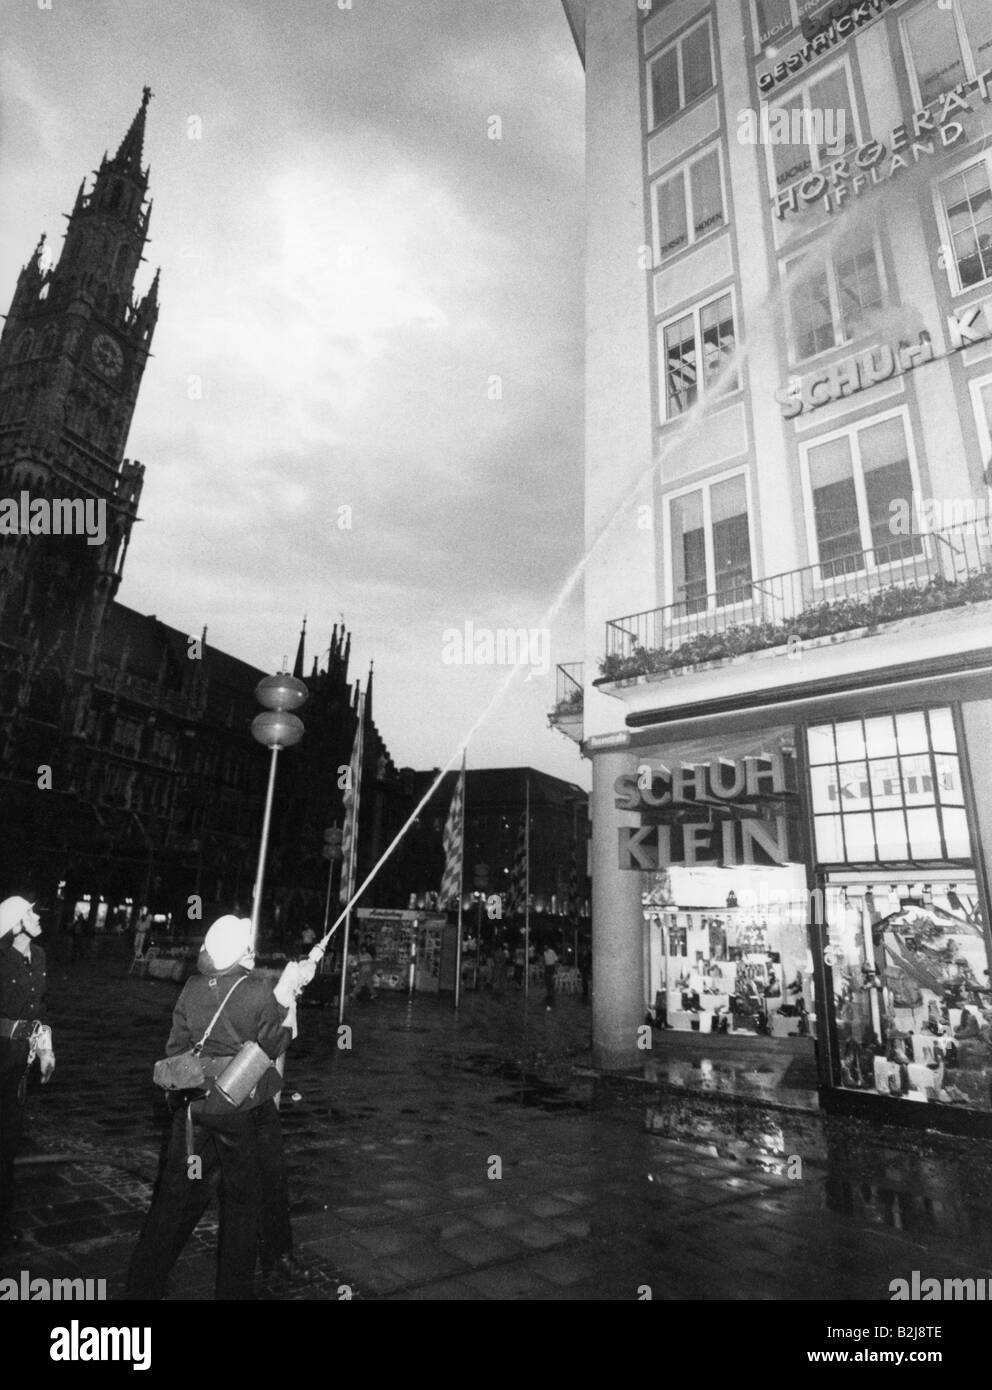 natural disaster/catastrophe, fire brigade, Mary's Square, Munich, 12.7.1984, Stock Photo